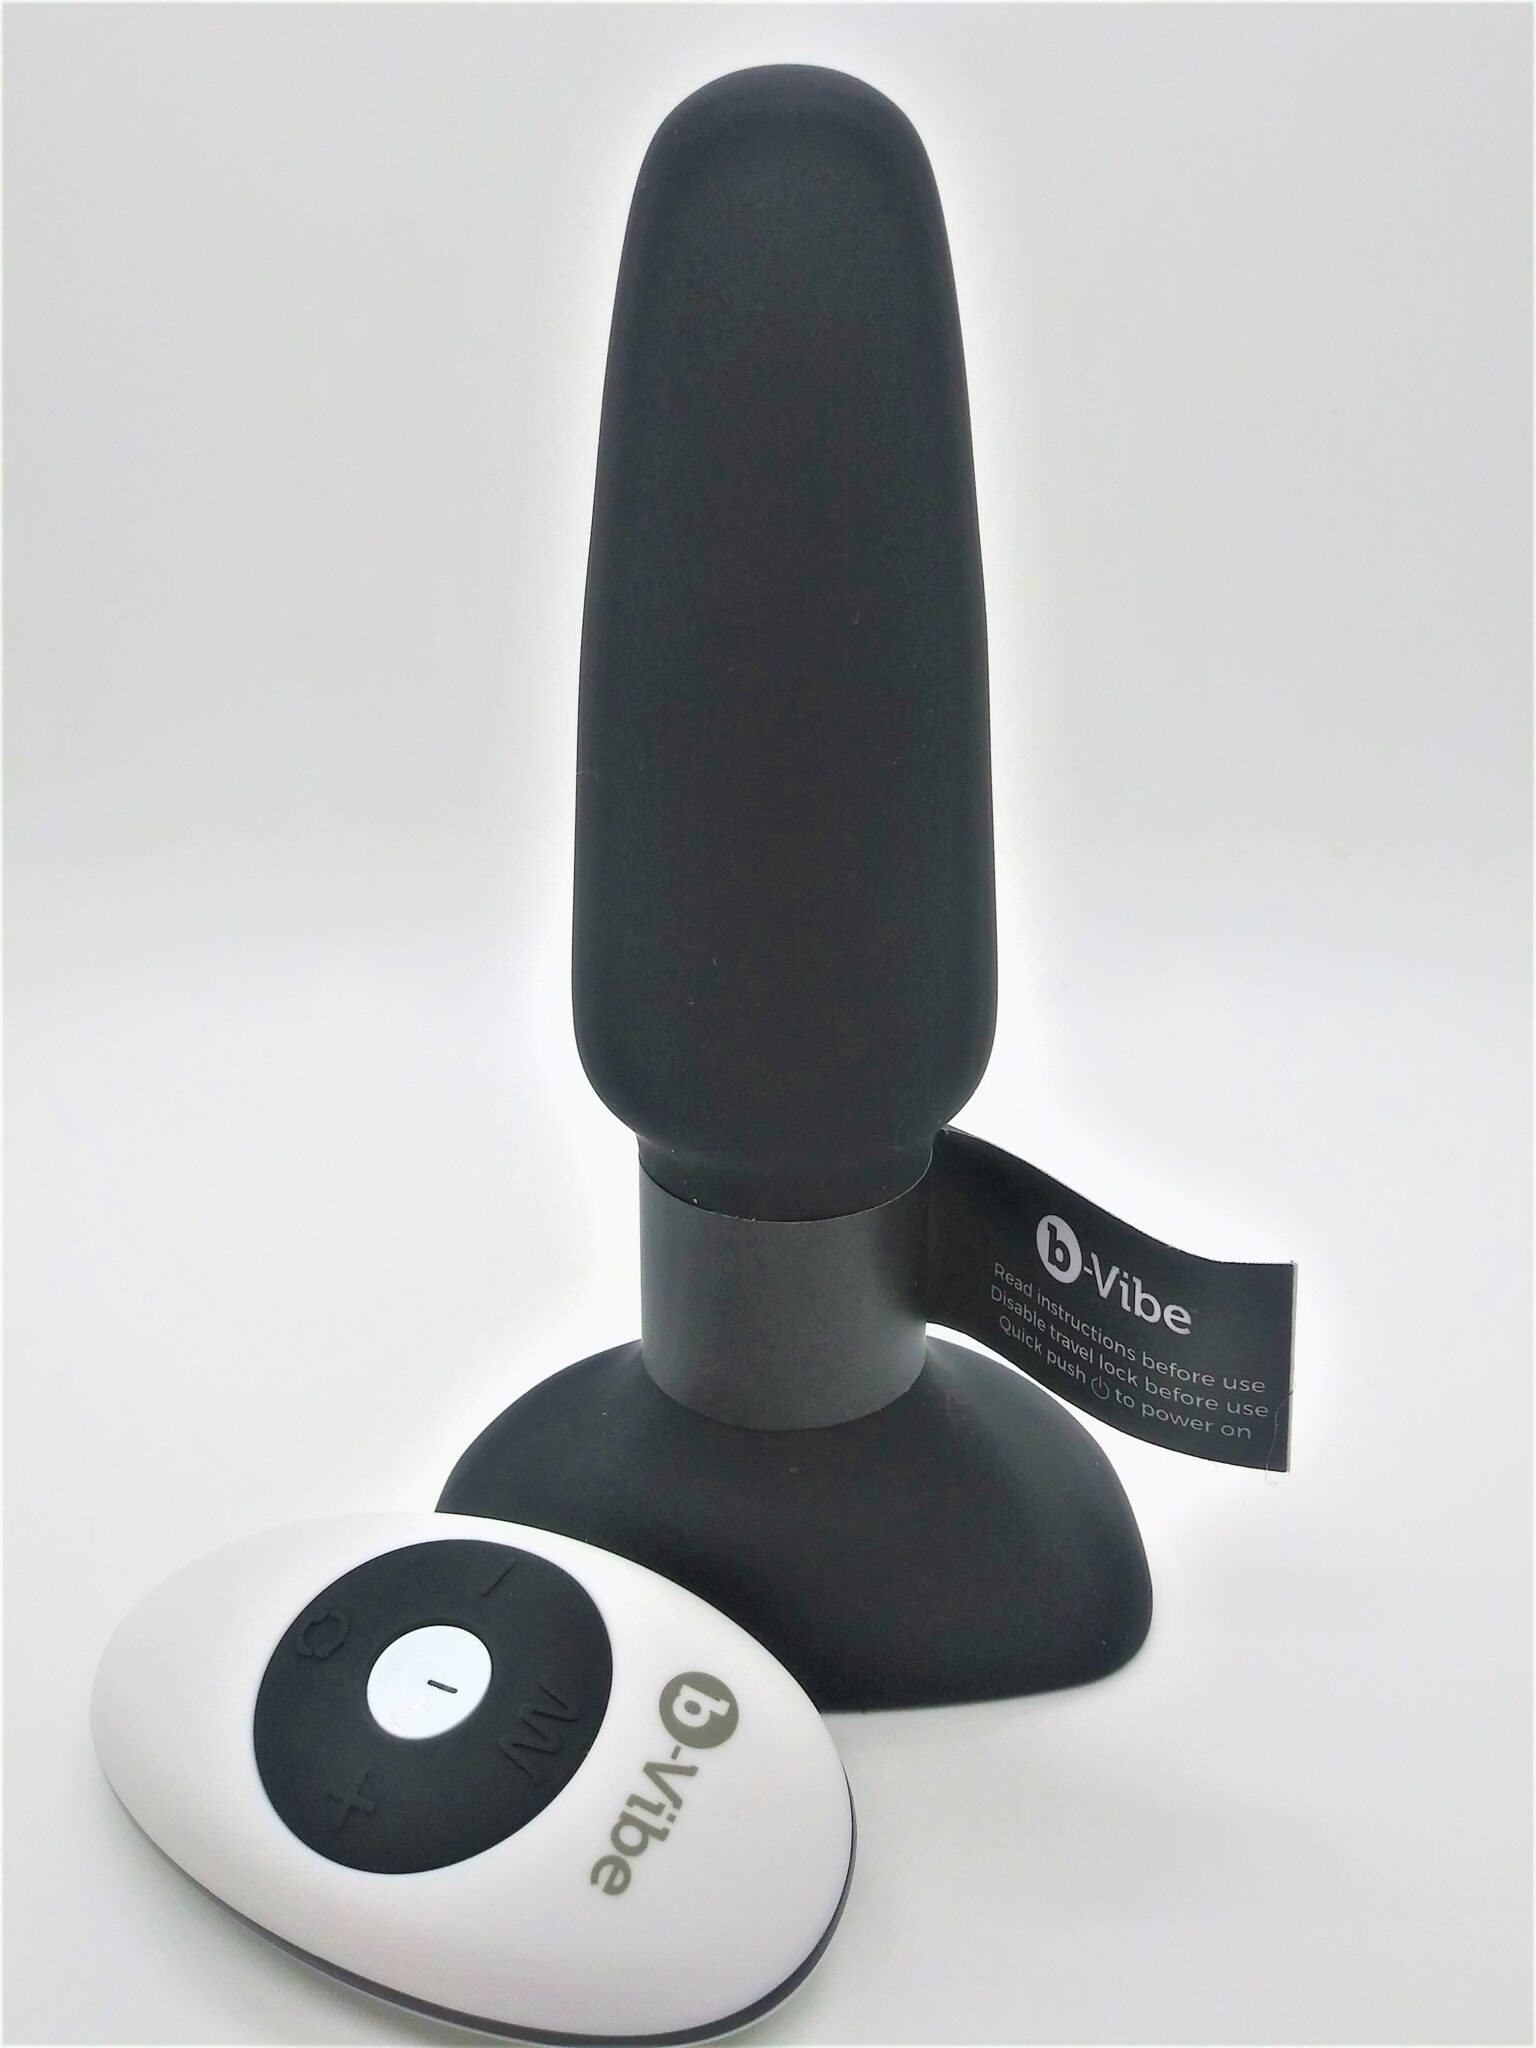 b-Vibe Remote Control Rechargeable Vibrating Rimming Butt Plug. Slide 5